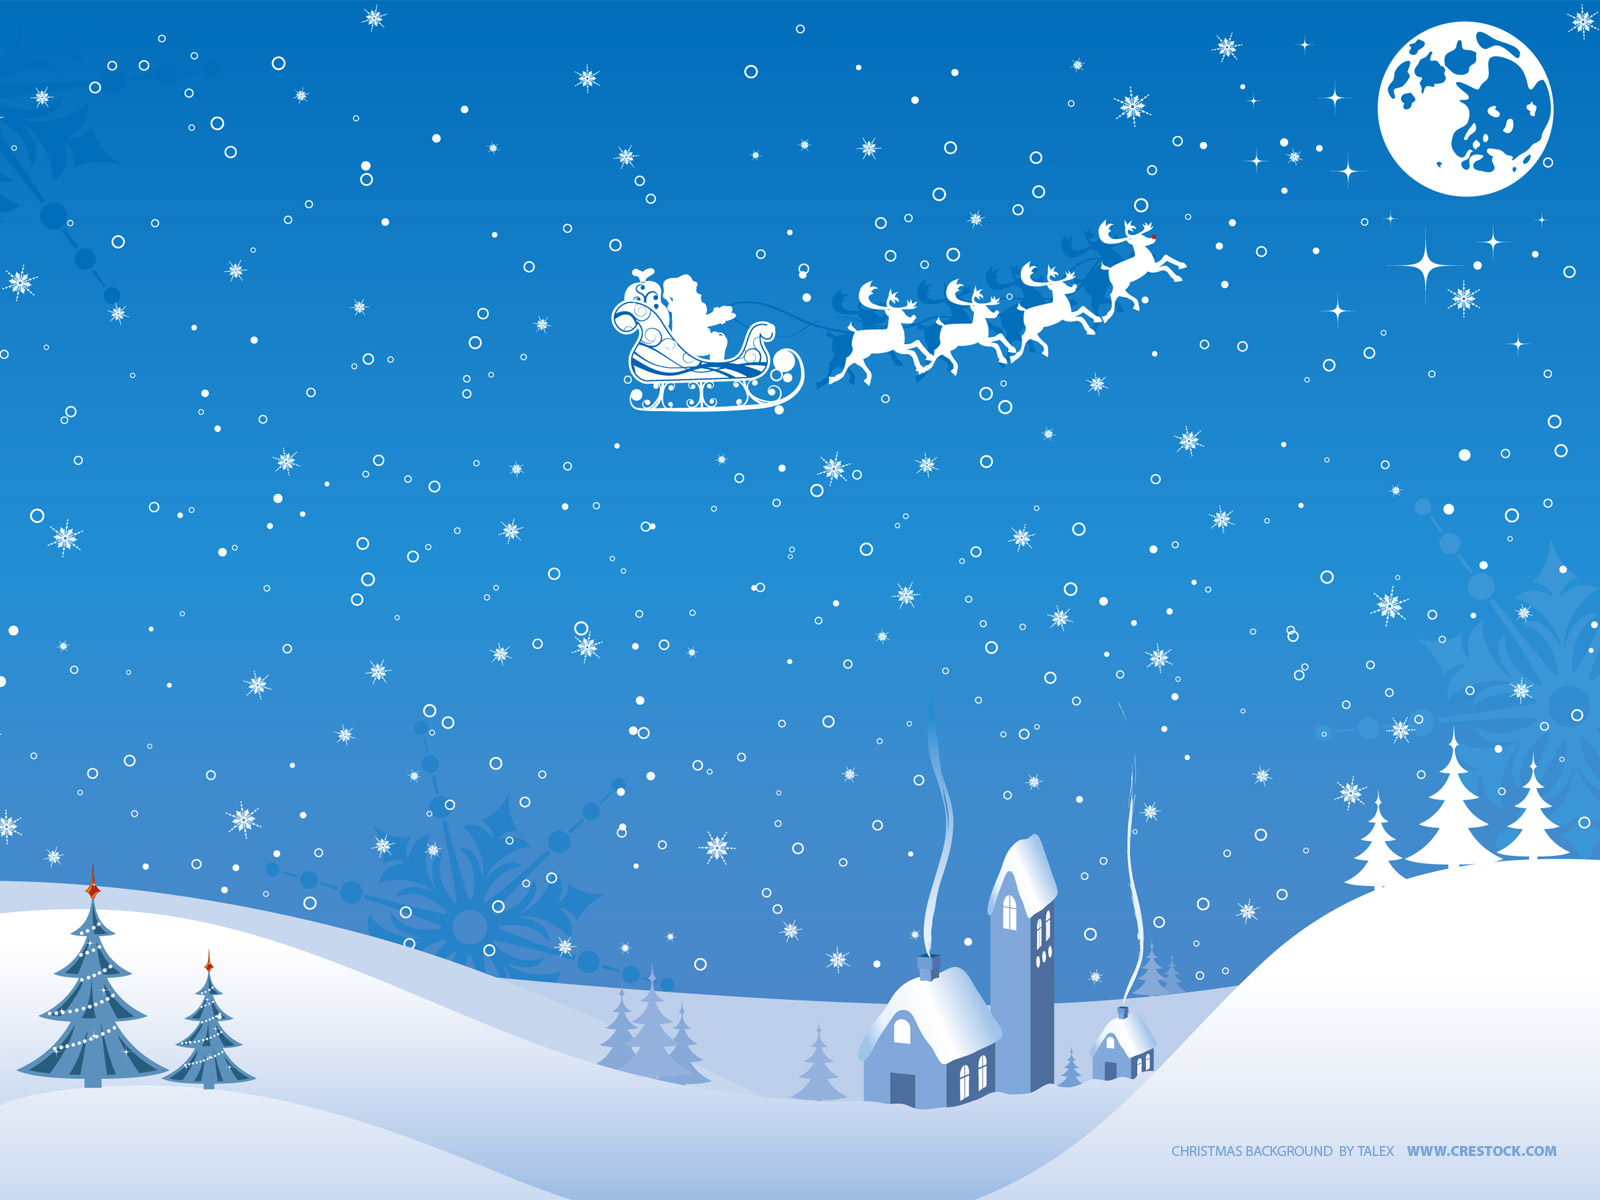 Cool Christmas And Winter Wallpaper For Your Desktop